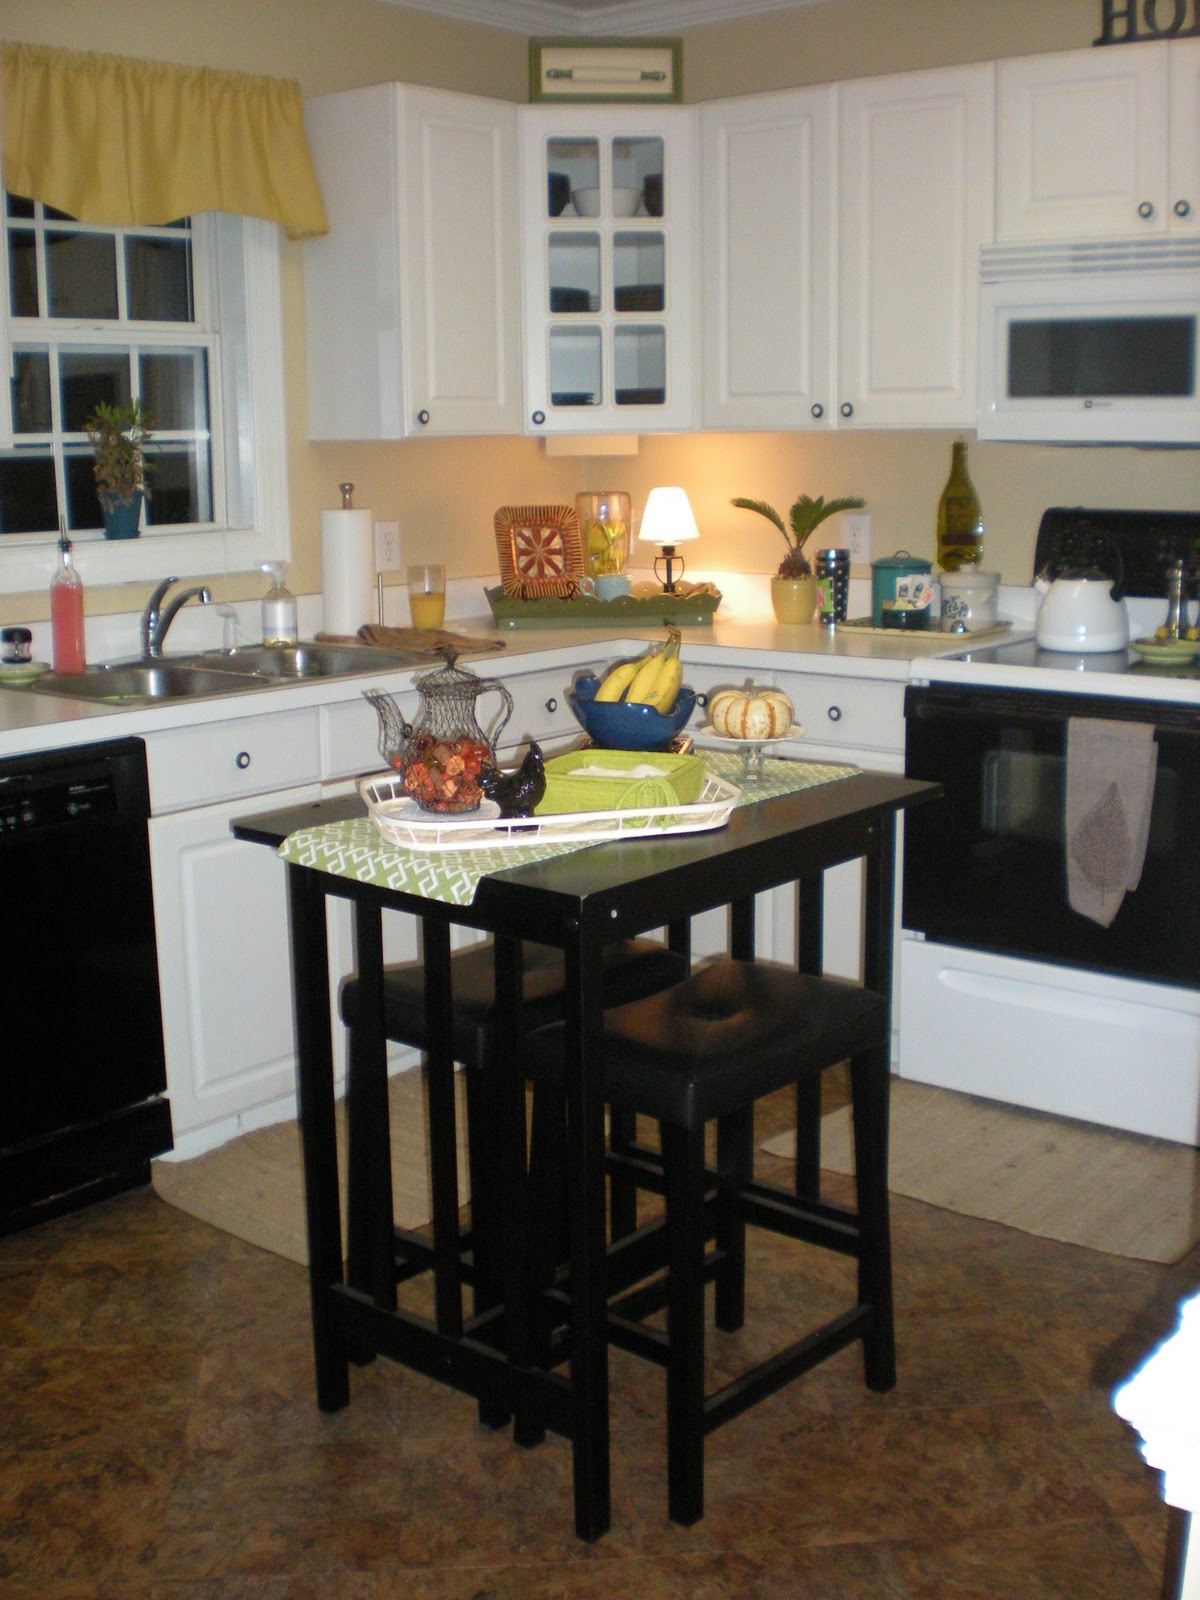 Thrifty Finds and Redesigns: Create your own Kitchen Island...